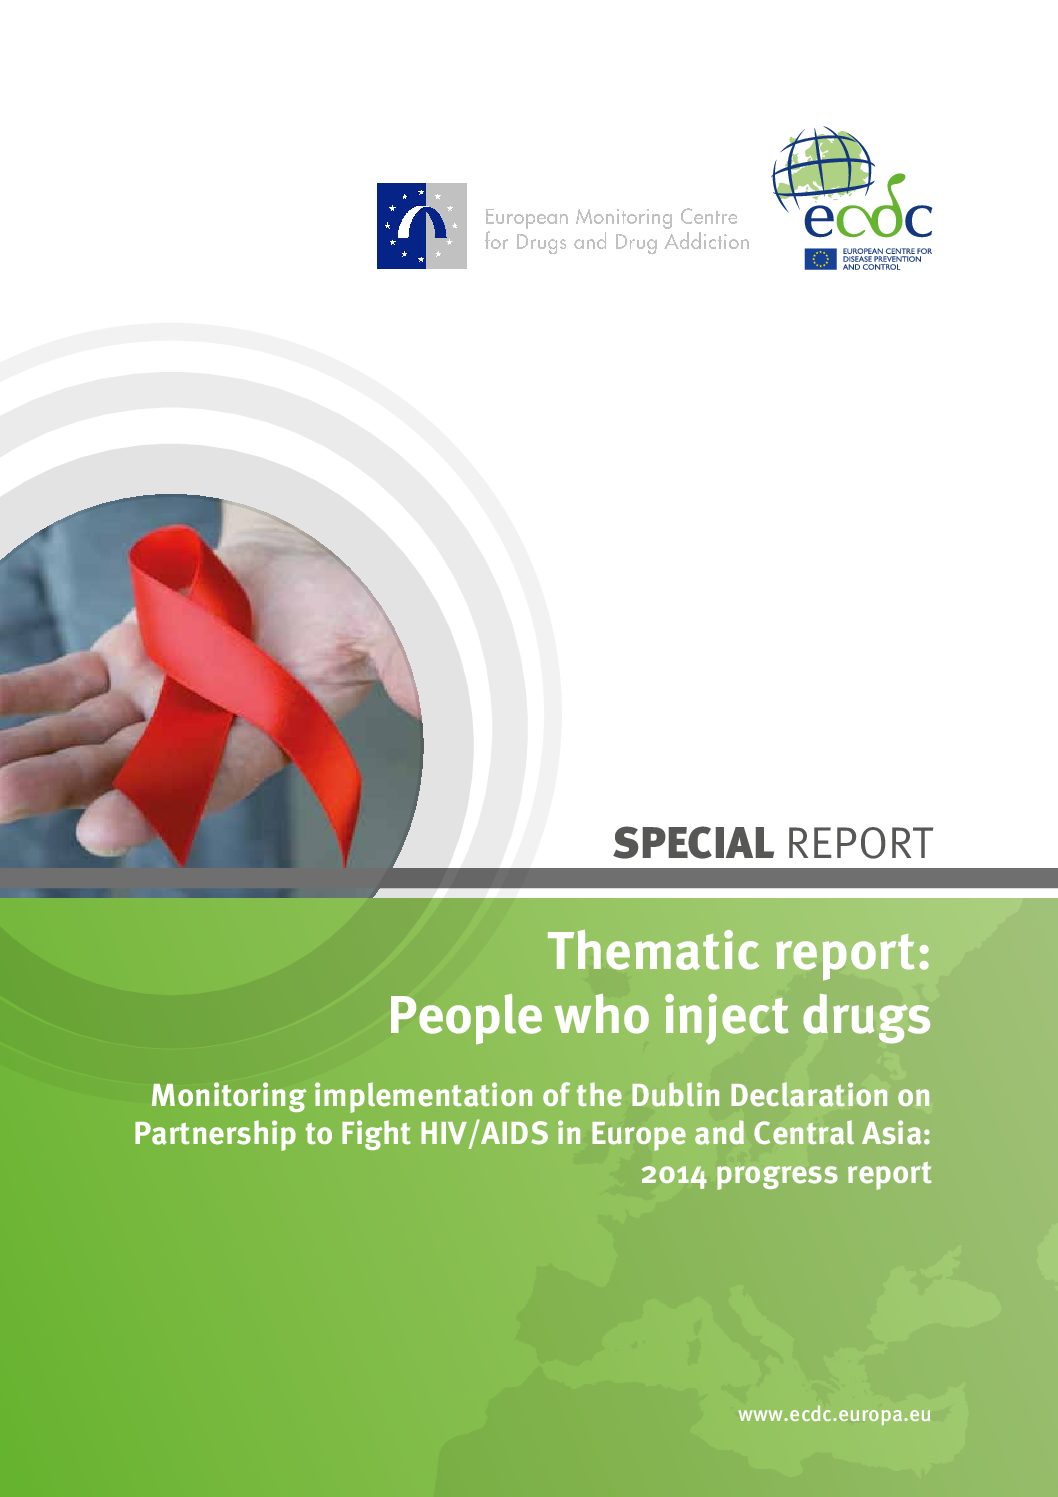 Thematic report: People who inject drugs. Monitoring implementation of the Dublin Declaration on Partnership to Fight HIV/AIDS in Europe and Central Asia: 2014 progress report